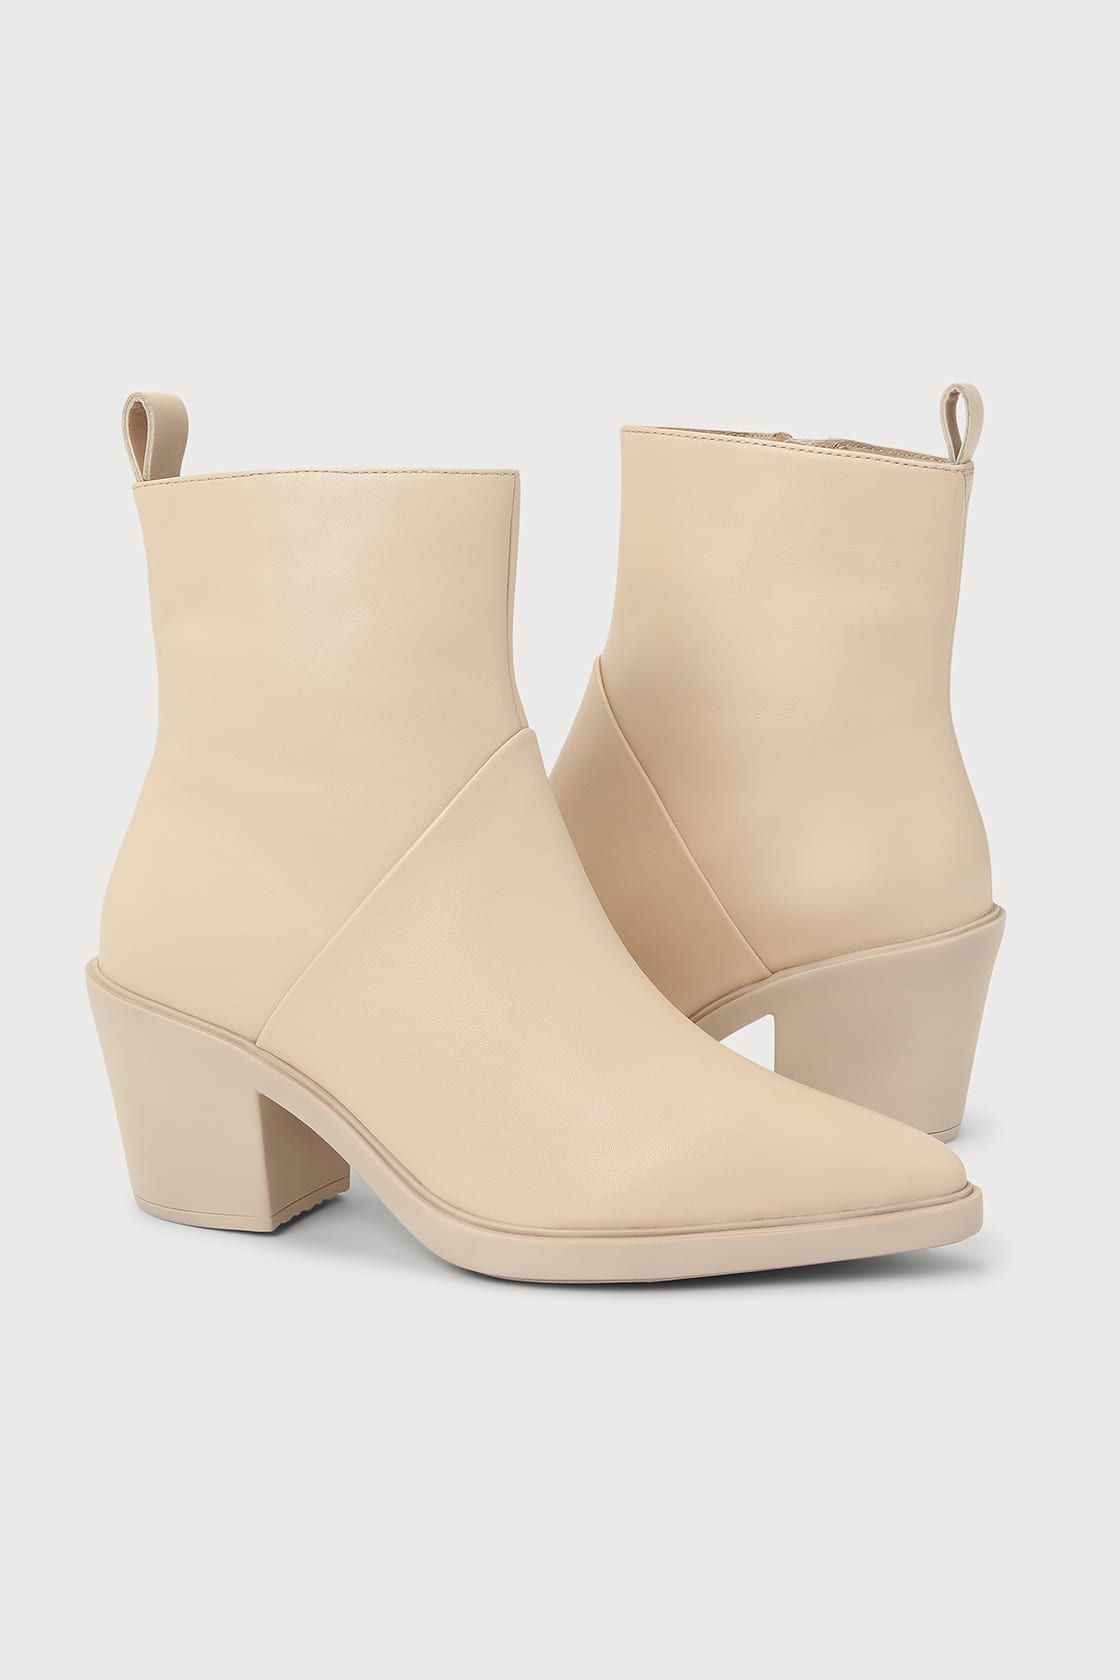 Shining Star Cream Leather Pointed-Toe Ankle Boots | Lulus (US)